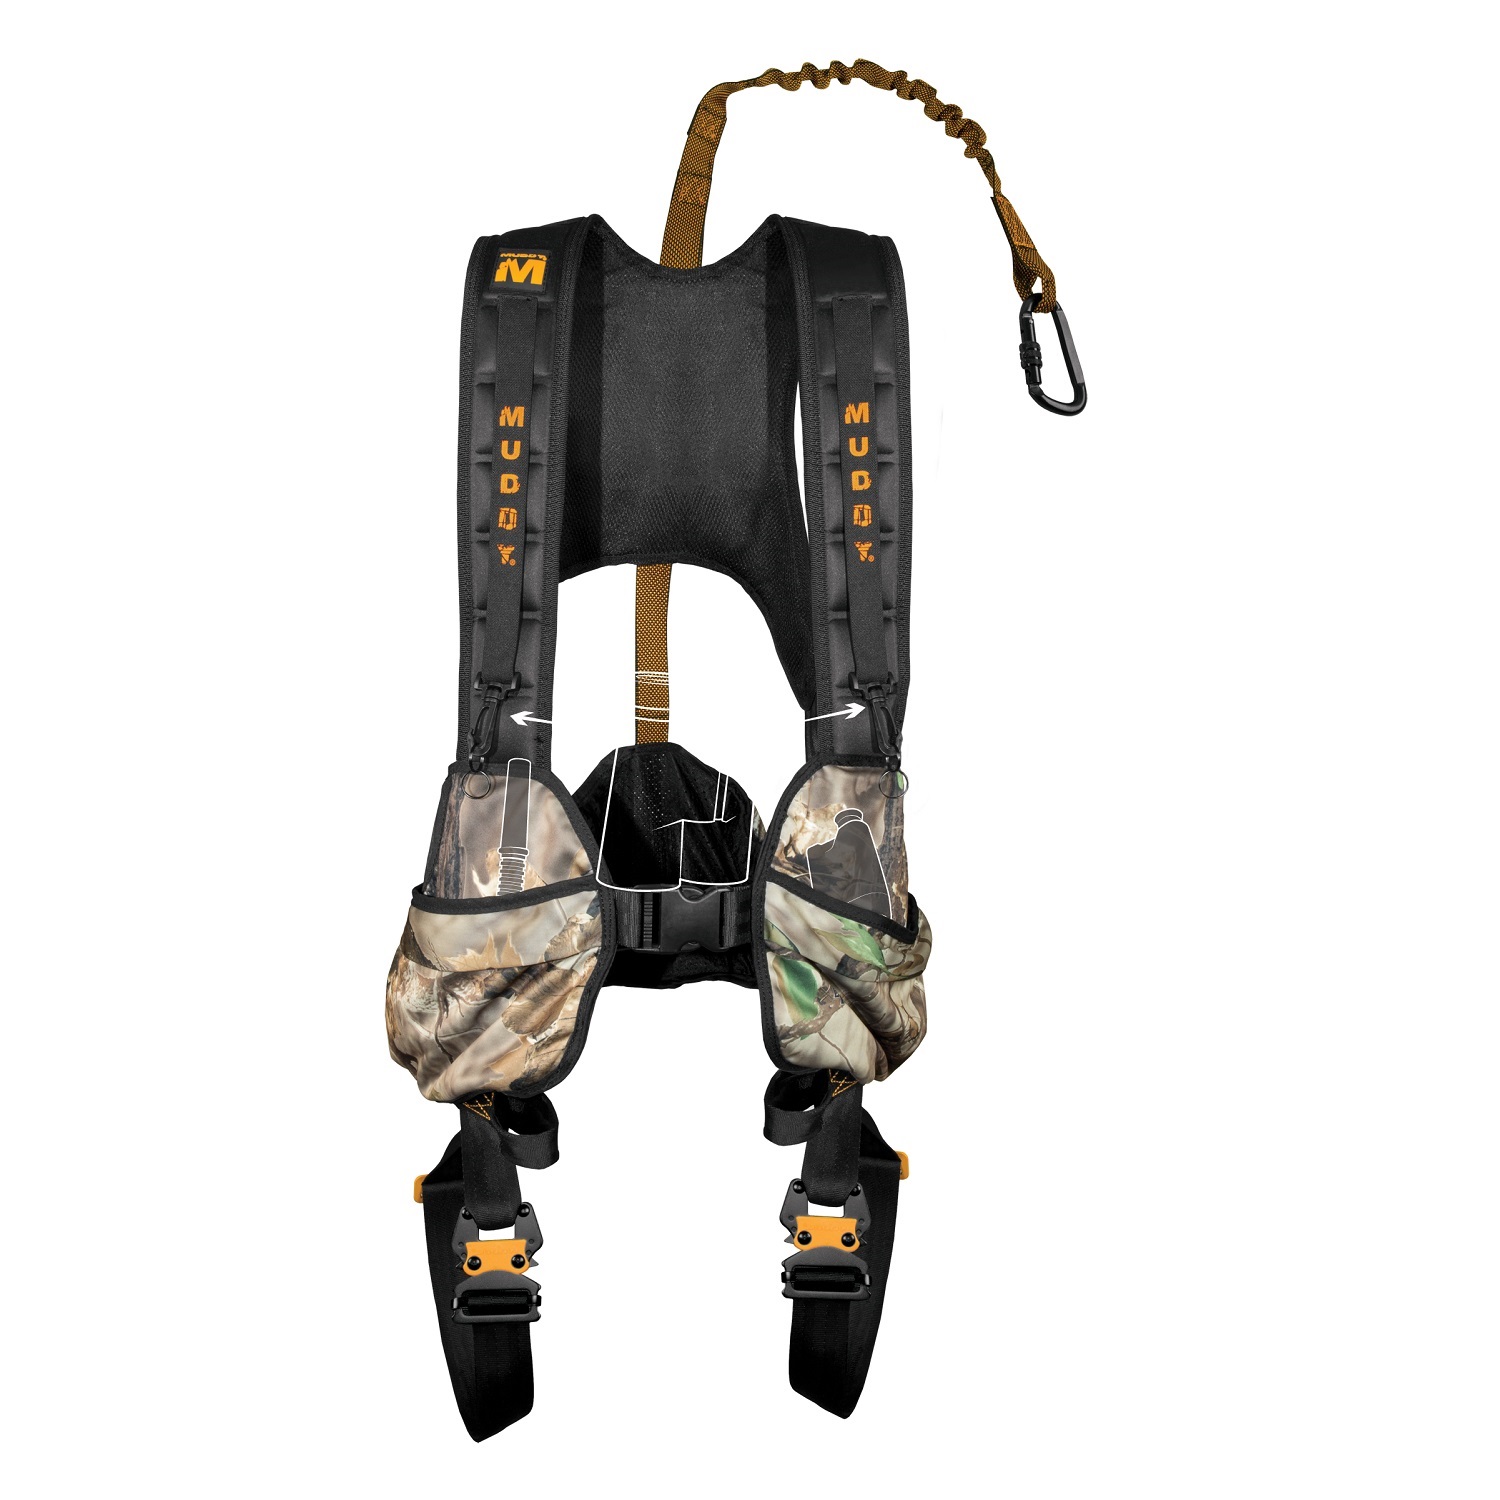 Muddy Crossover Harness Combo - S/m - Msh600-sm-c